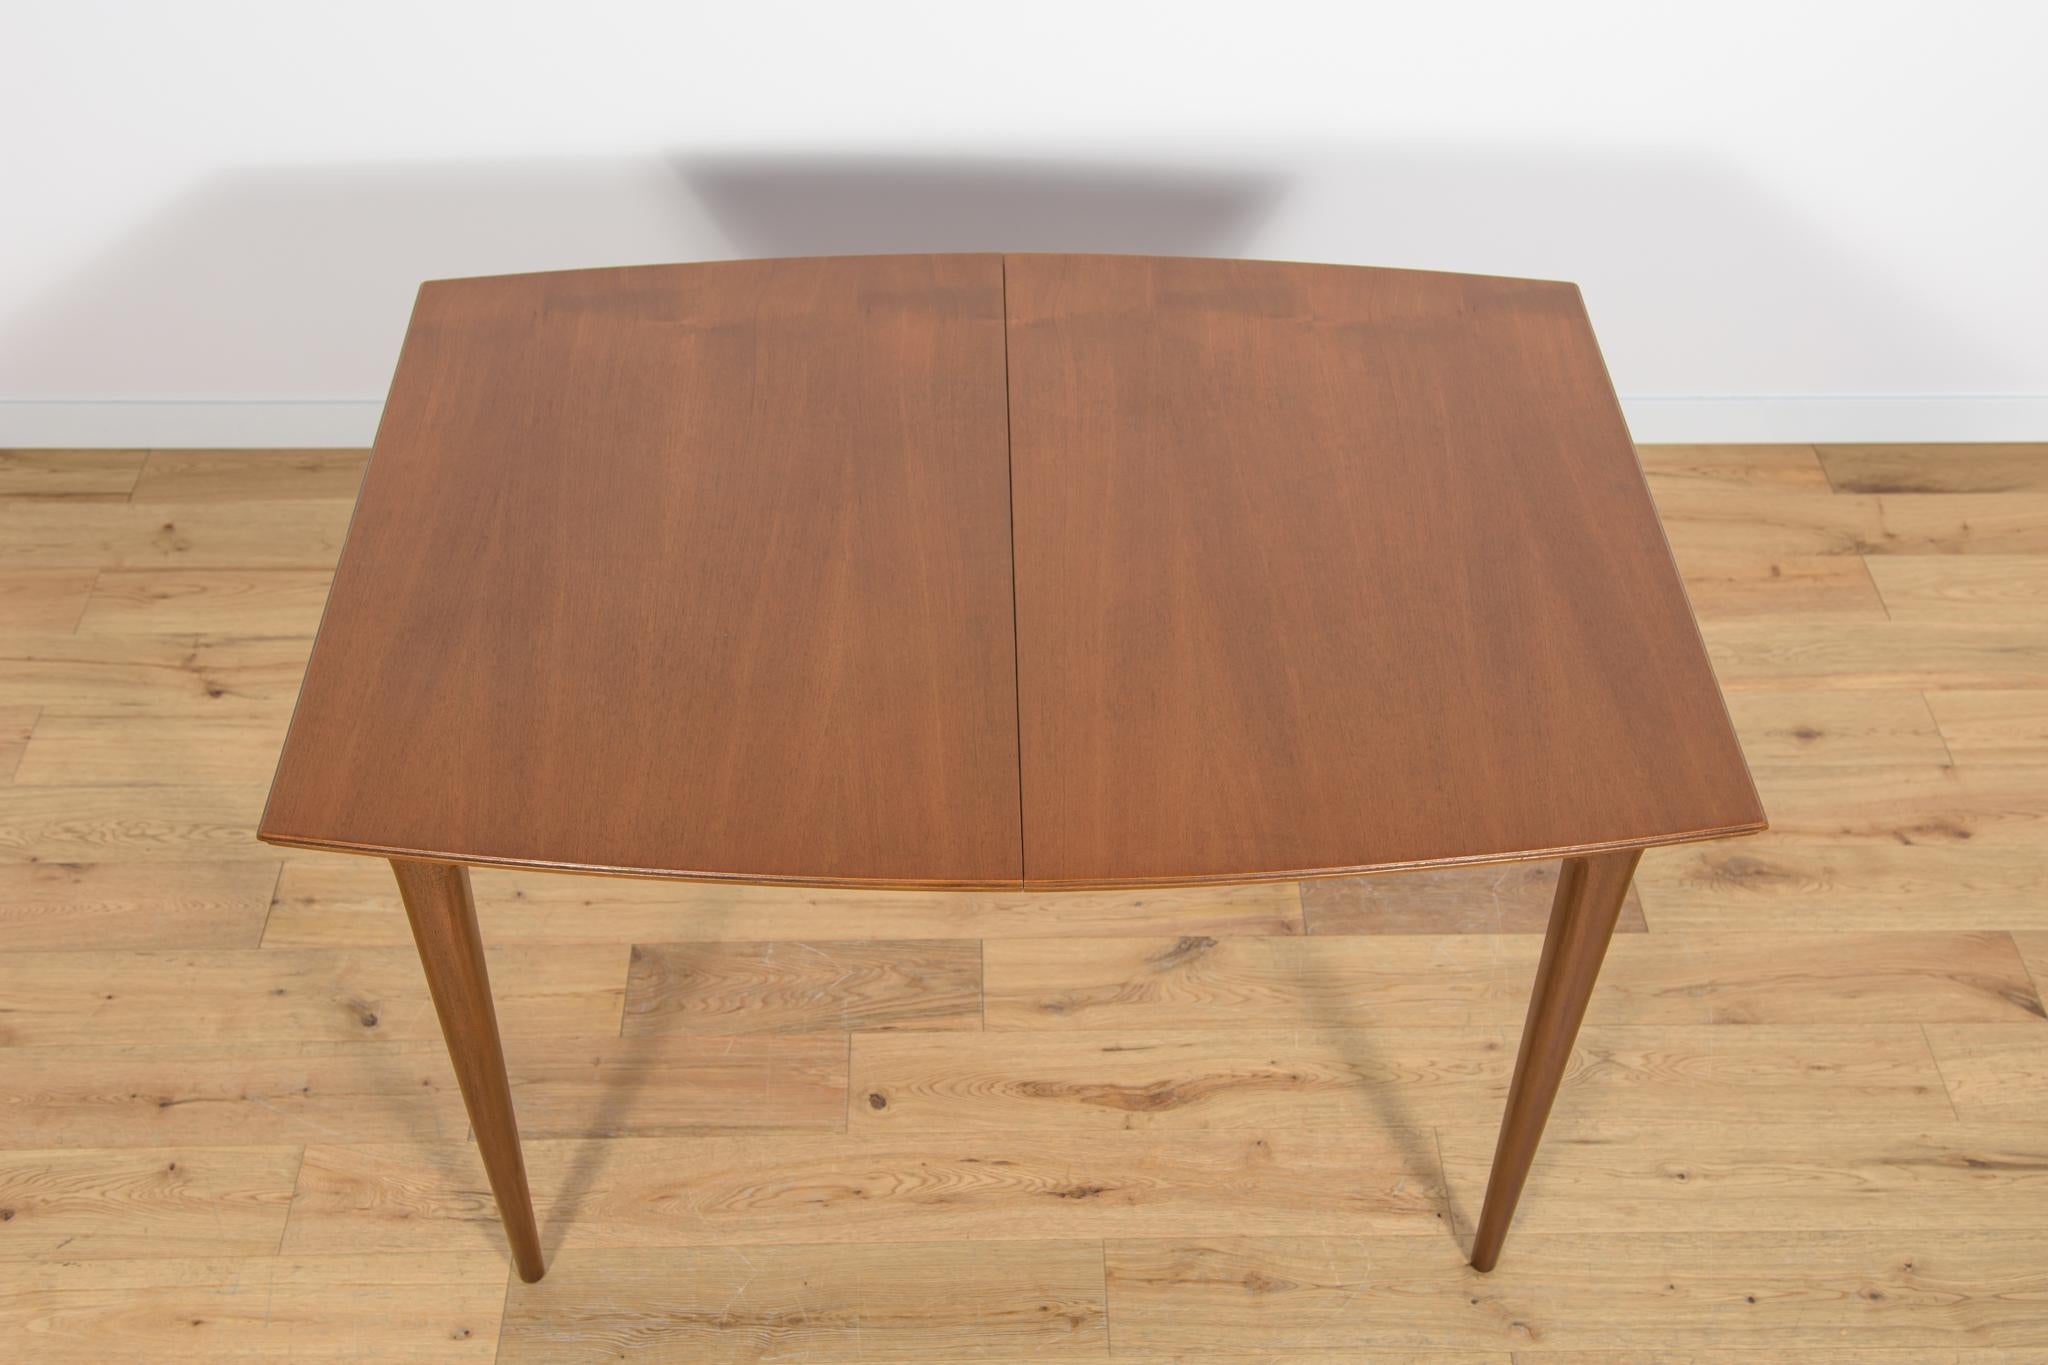 British Mid-Century Teak Extendable Dining Table from McIntosh, 1960s For Sale